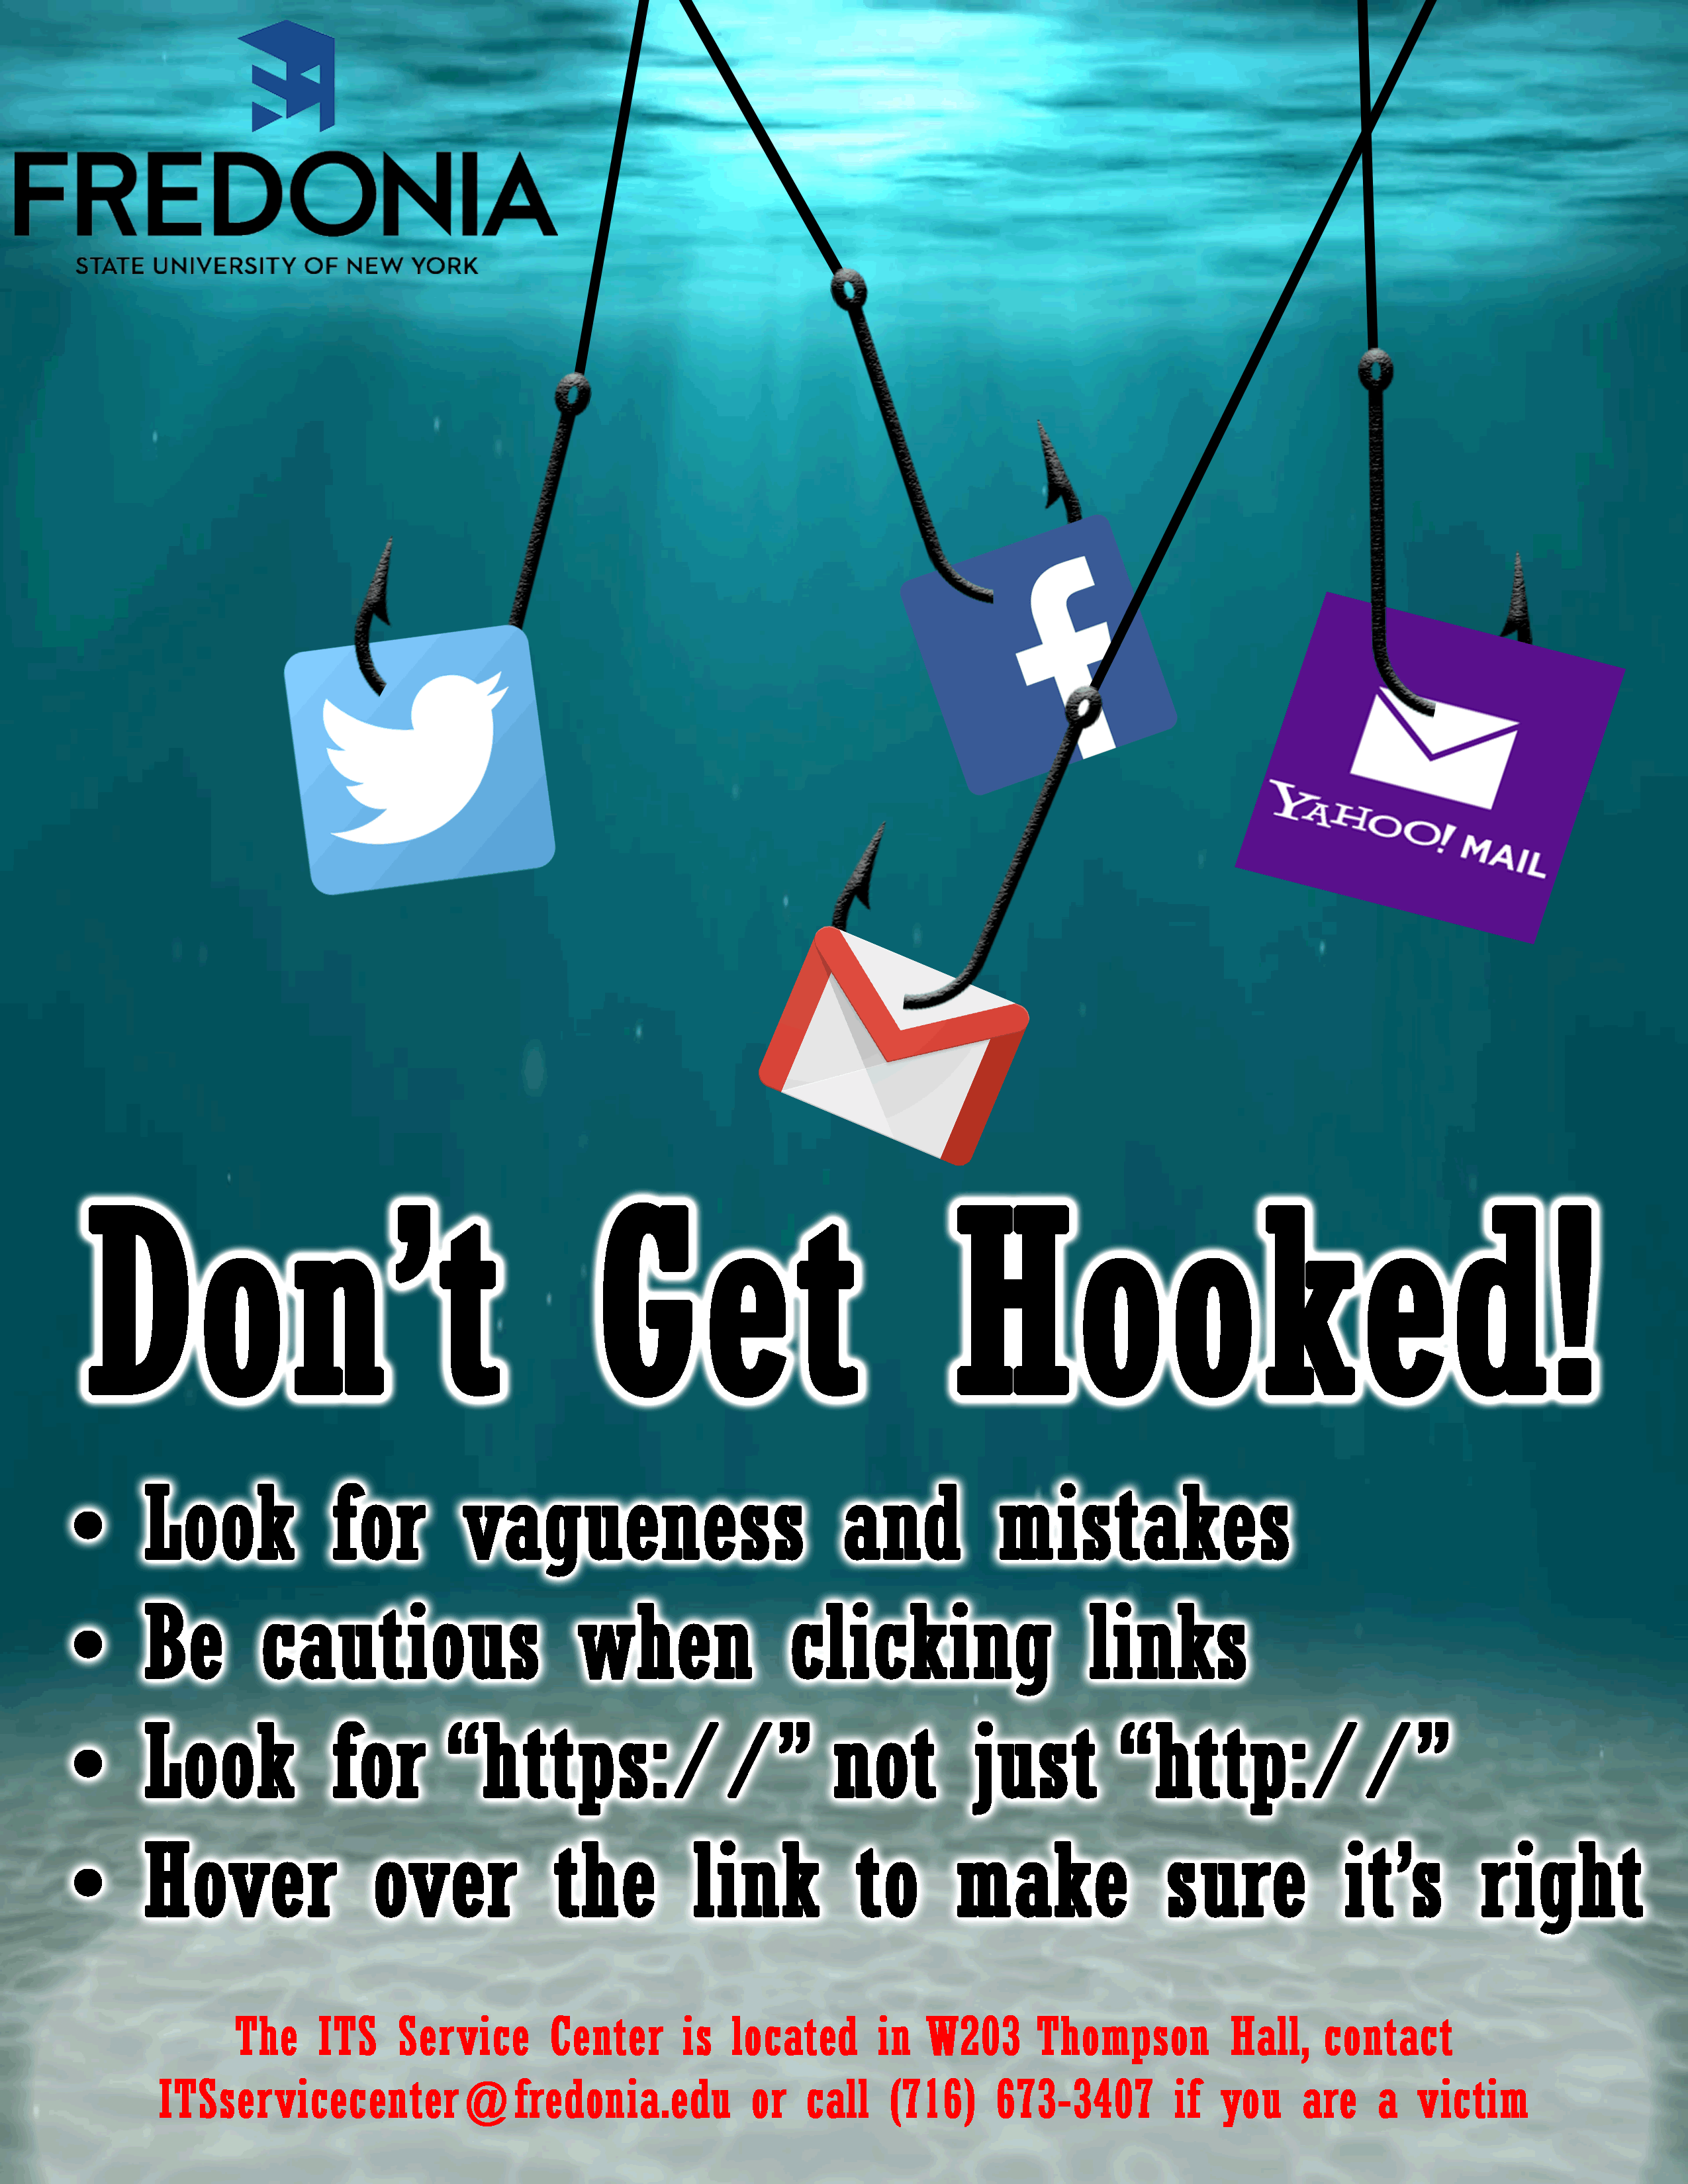 Phishing Scam Awareness - don't get hooked, or click on vague links